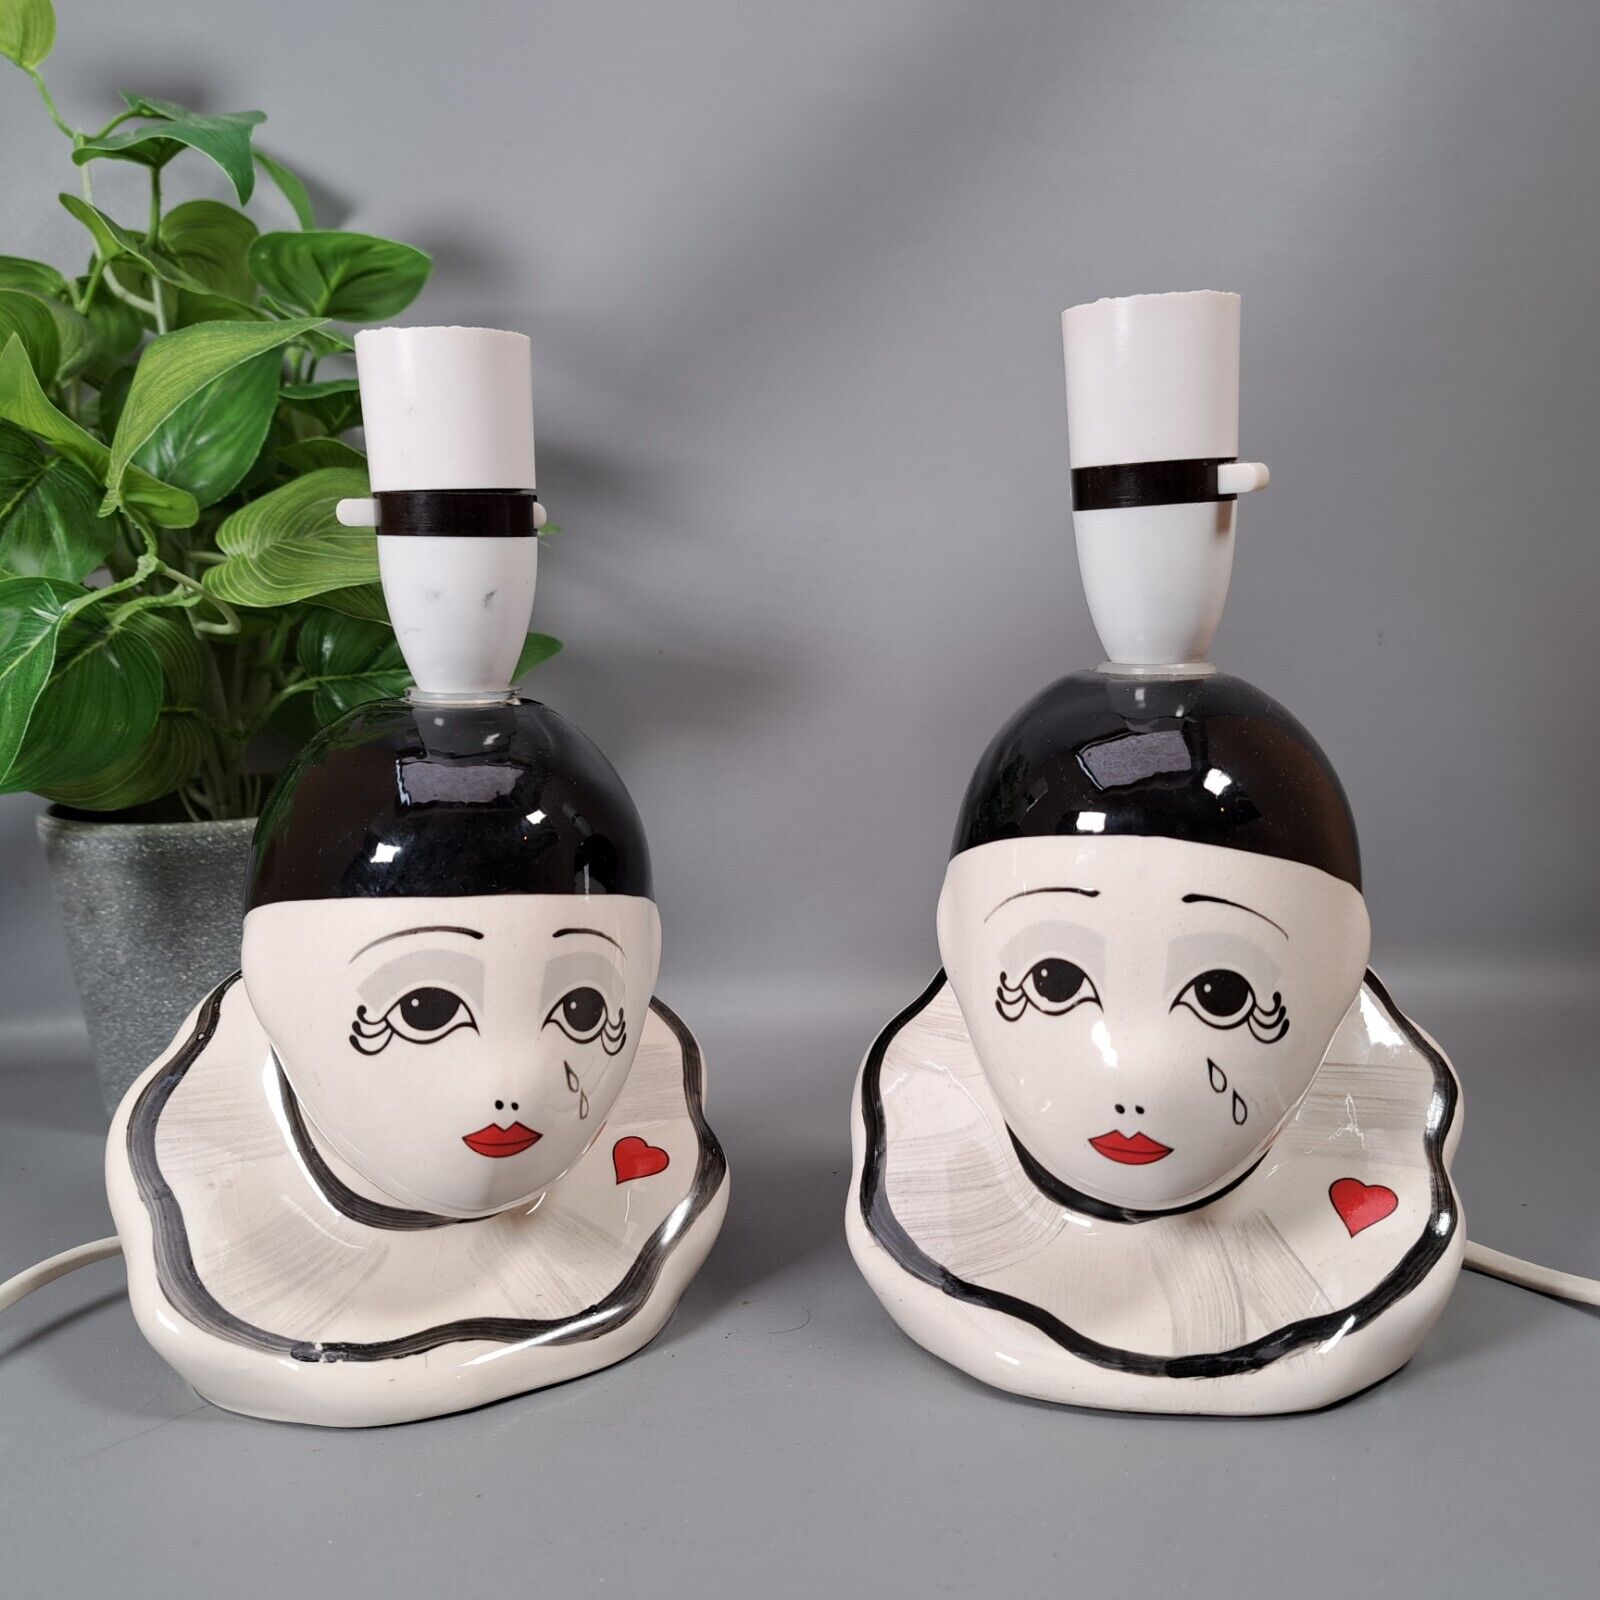 Vintage pair of ceramic french pierrot clown table lamps lights kitsch retro vtg